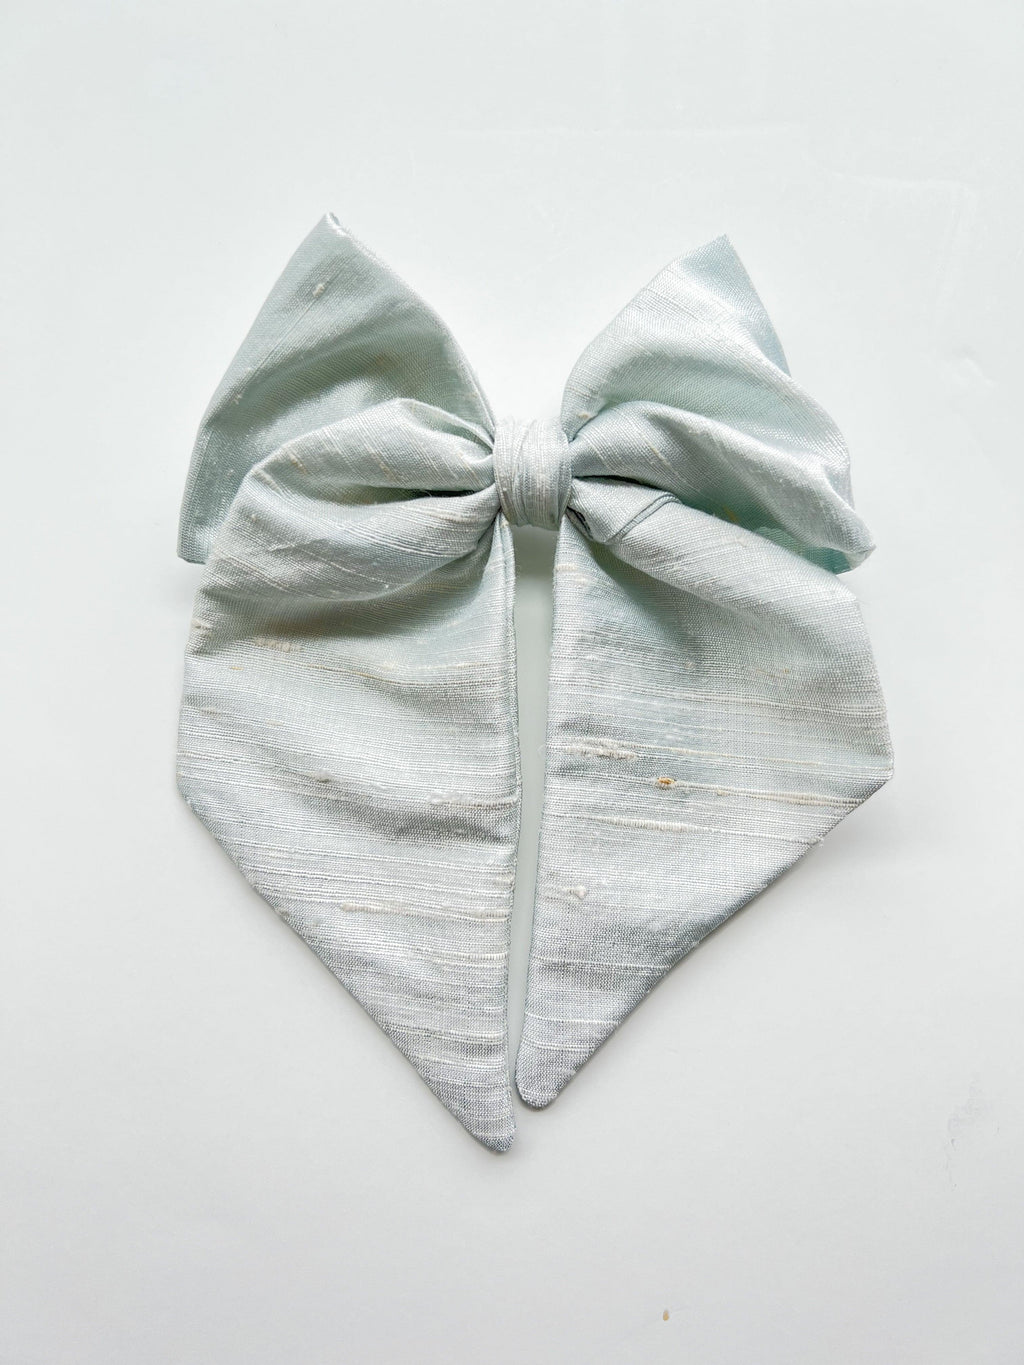 Vintage Sailor - Georgetown | Nashville Bow Co. - Classic Hair Bows, Bow Ties, Basket Bows, Pacifier Clips, Wreath Sashes, Swaddle Bows. Classic Southern Charm.